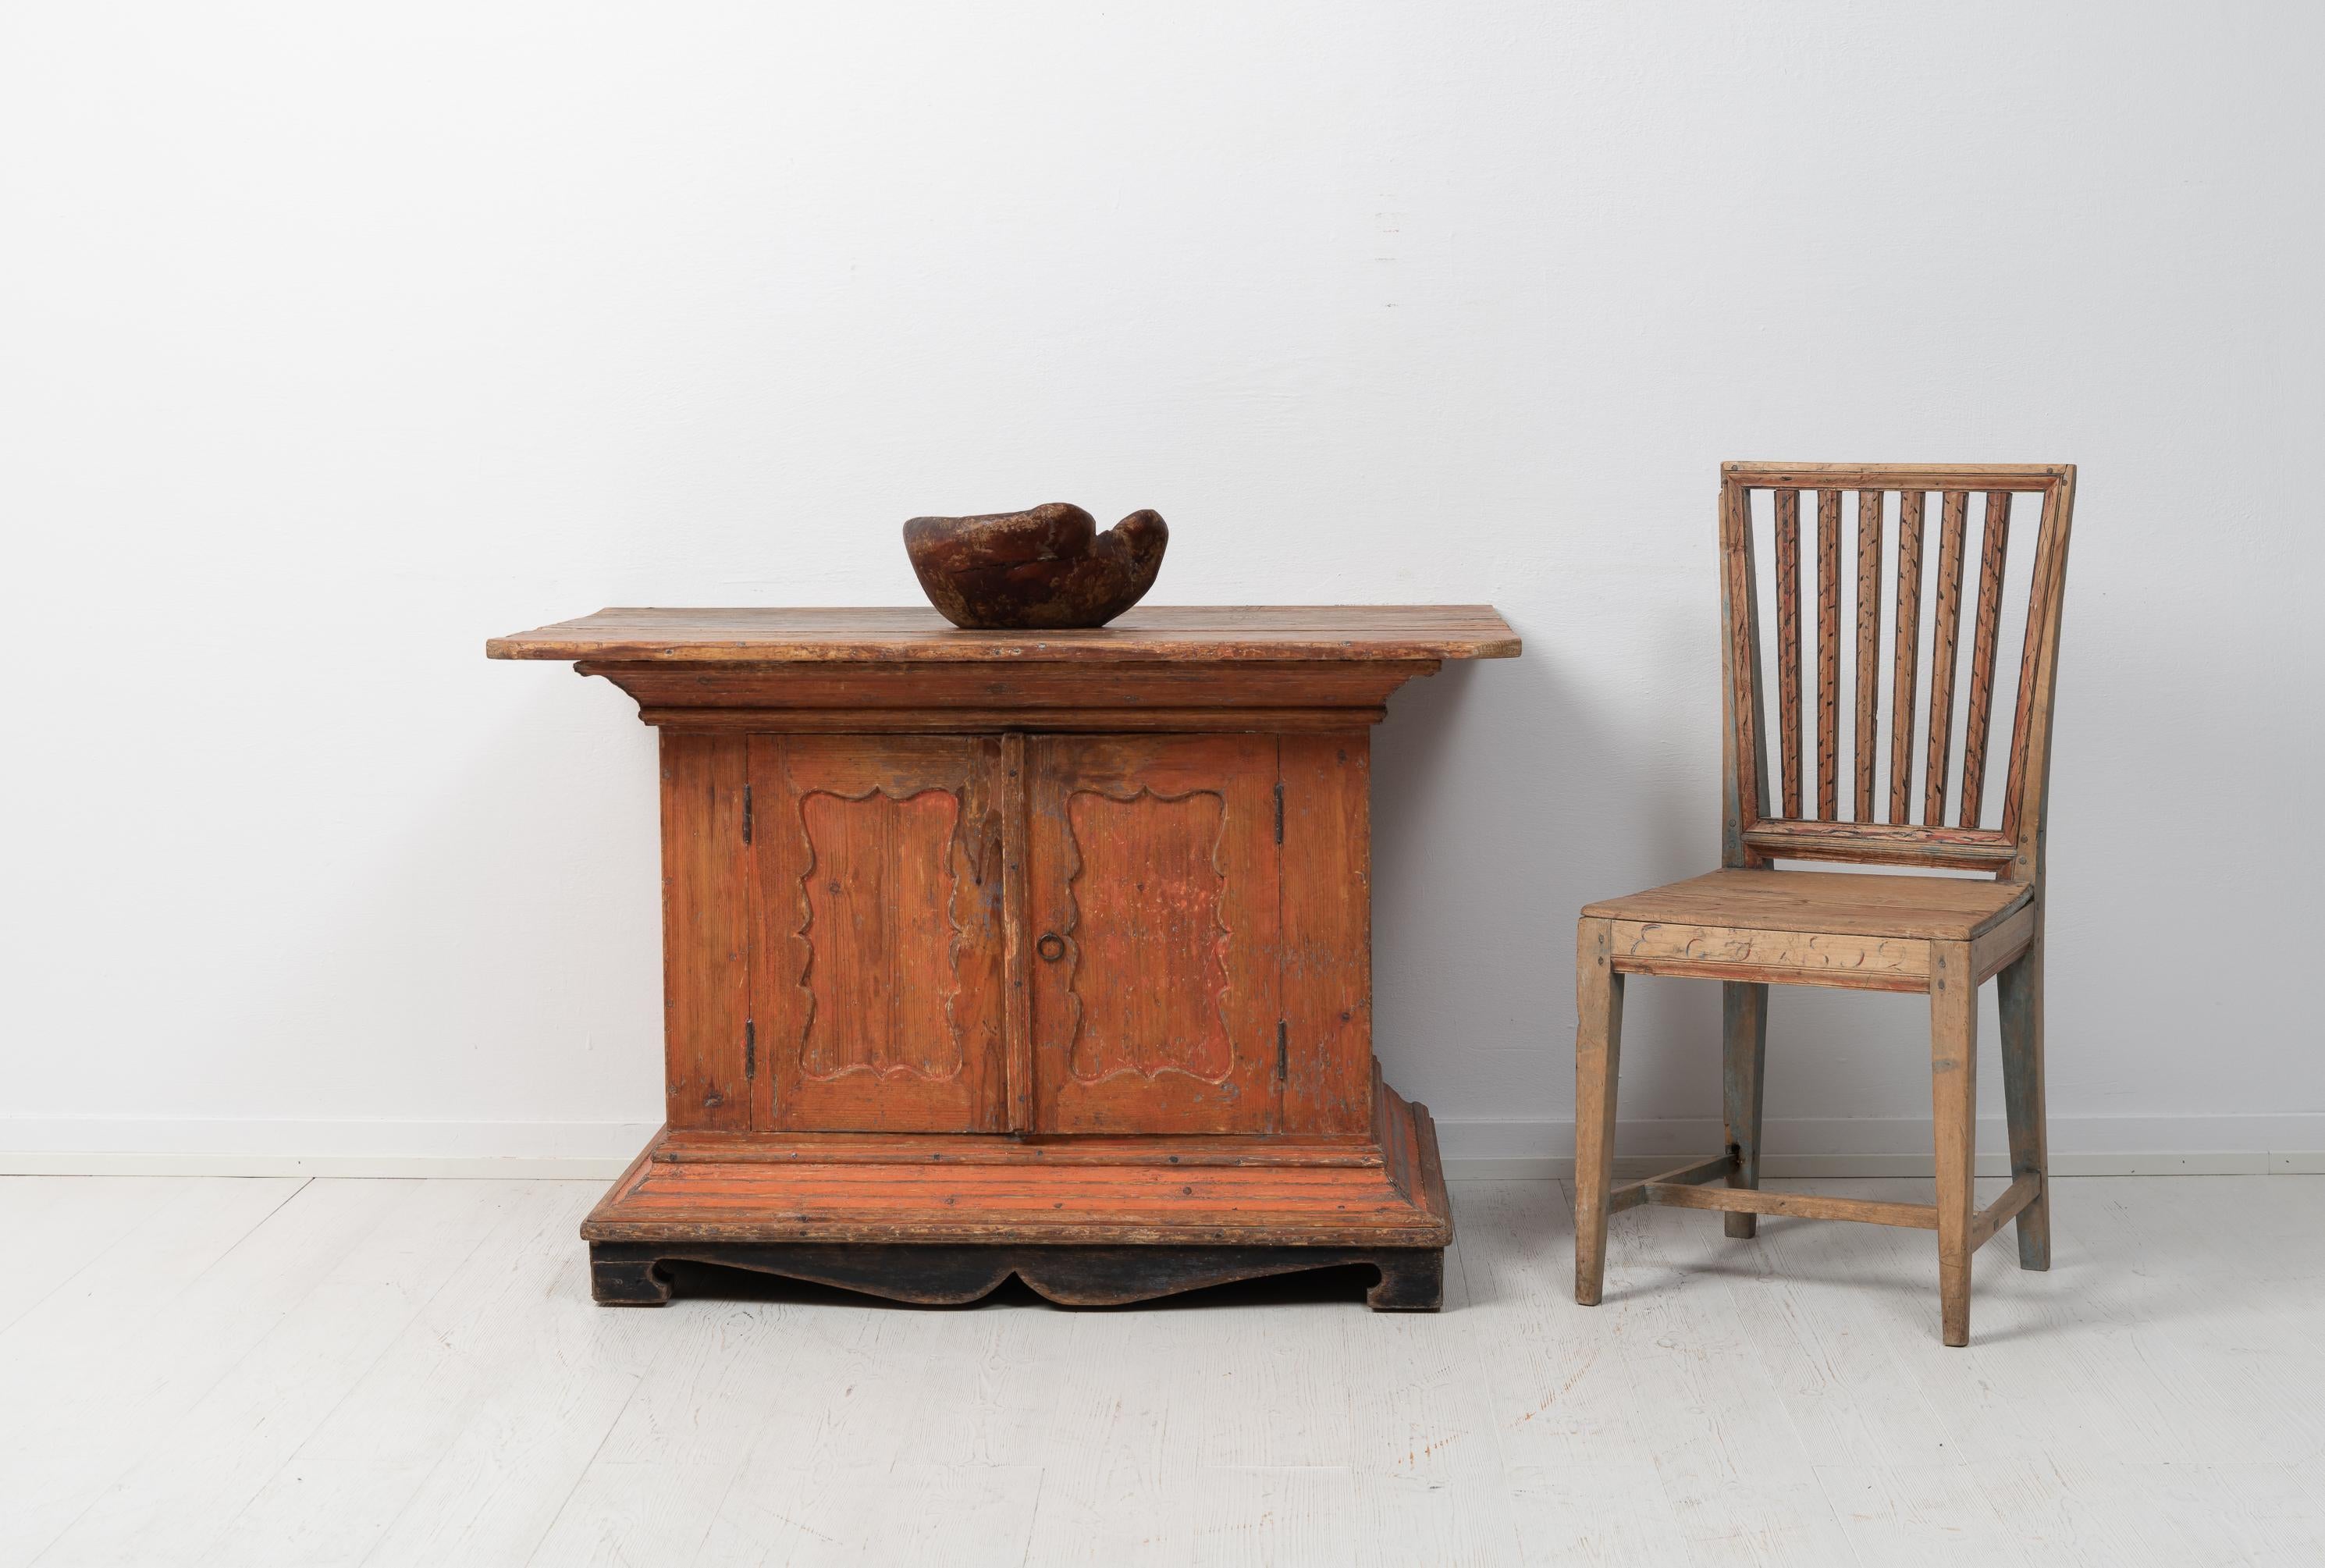 Antique rare Swedish sideboard in folk art from northern Sweden. The sideboard is from around 1810 to 1820 and is in an unusual model. The sideboard has an oversized table top and two doors as well as a strong profiled plinth. Made in painted pine